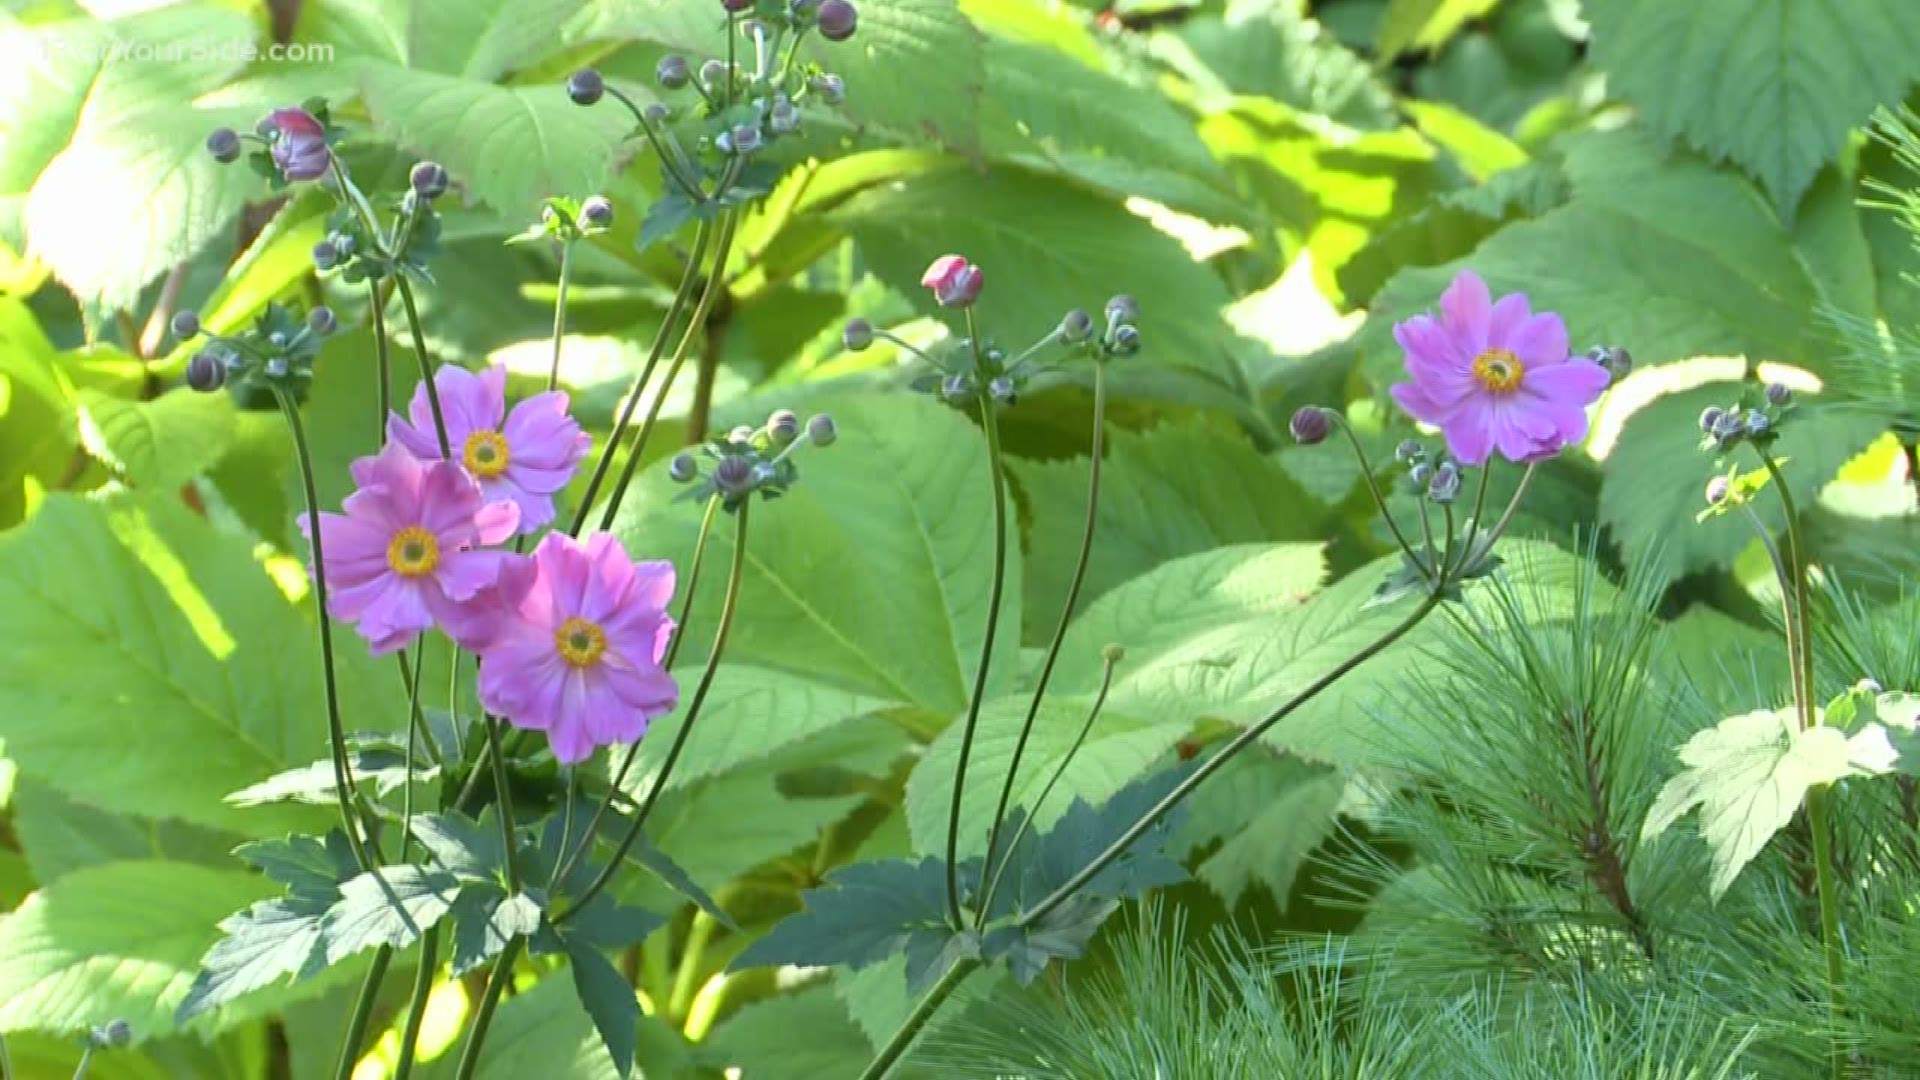 Greenthumb expert Rick Vuyst has some picks you might want to add to your garden to keep it blooming into next year.